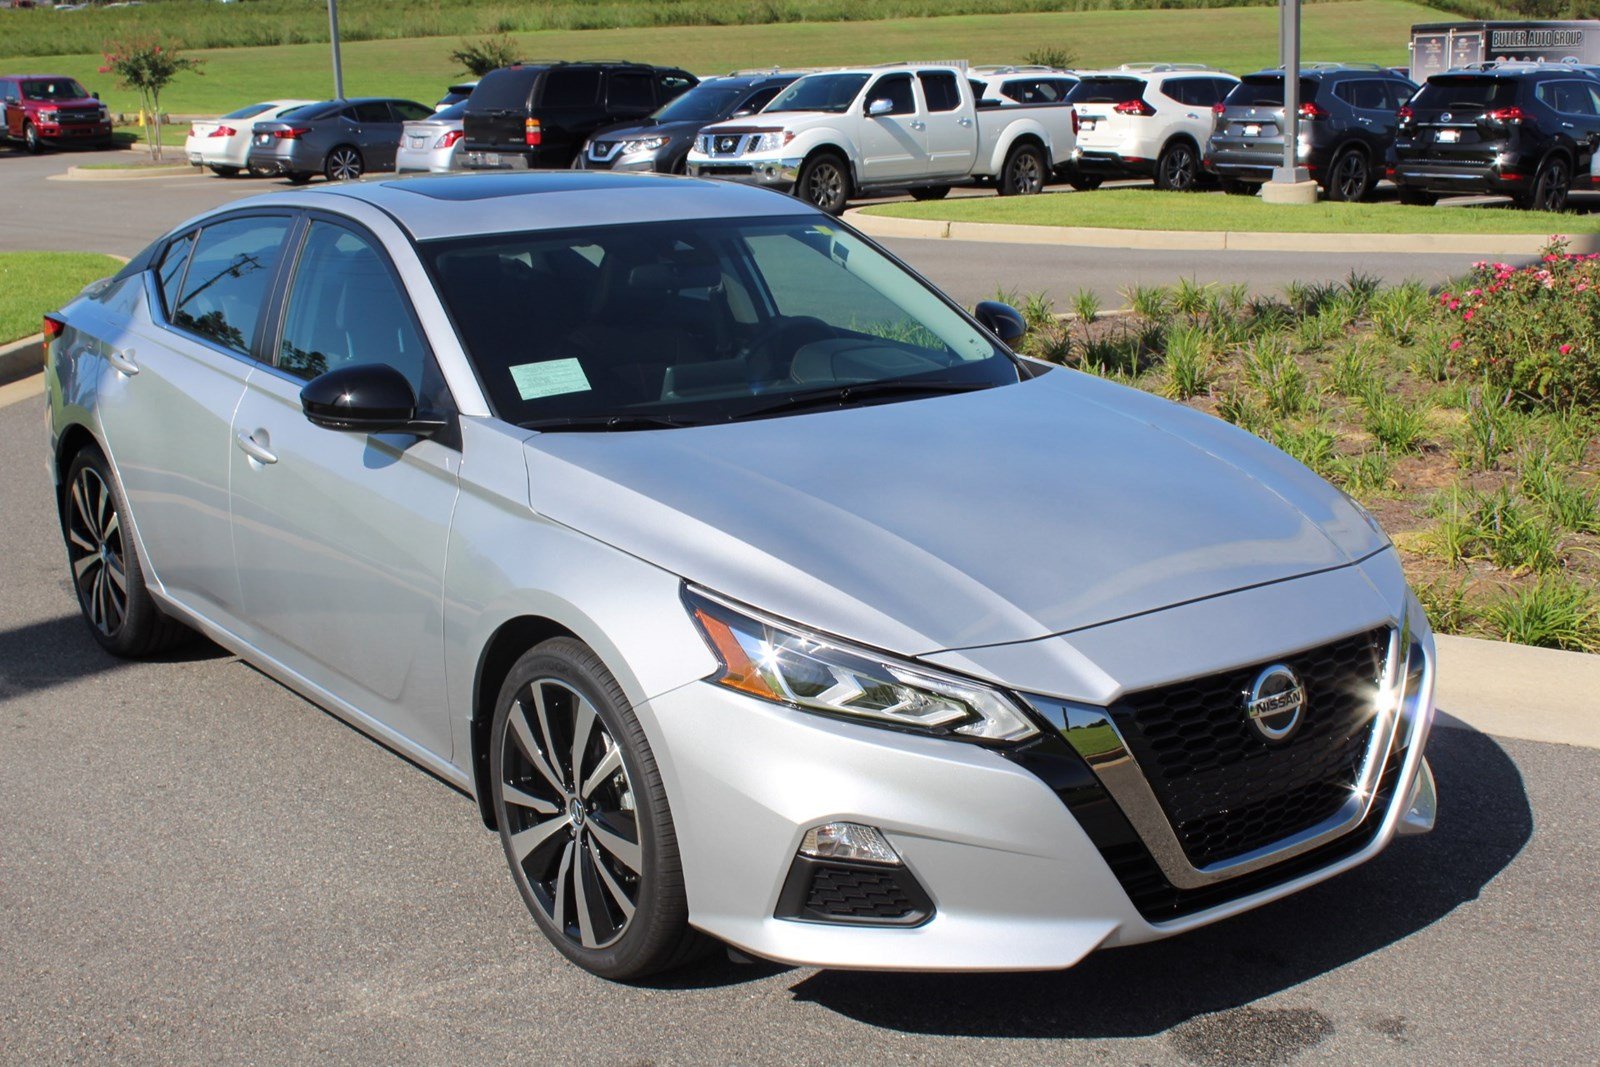 New 2020 Nissan Altima 2 5 SR 4dr Car in Macon N301127 Butler Auto Group